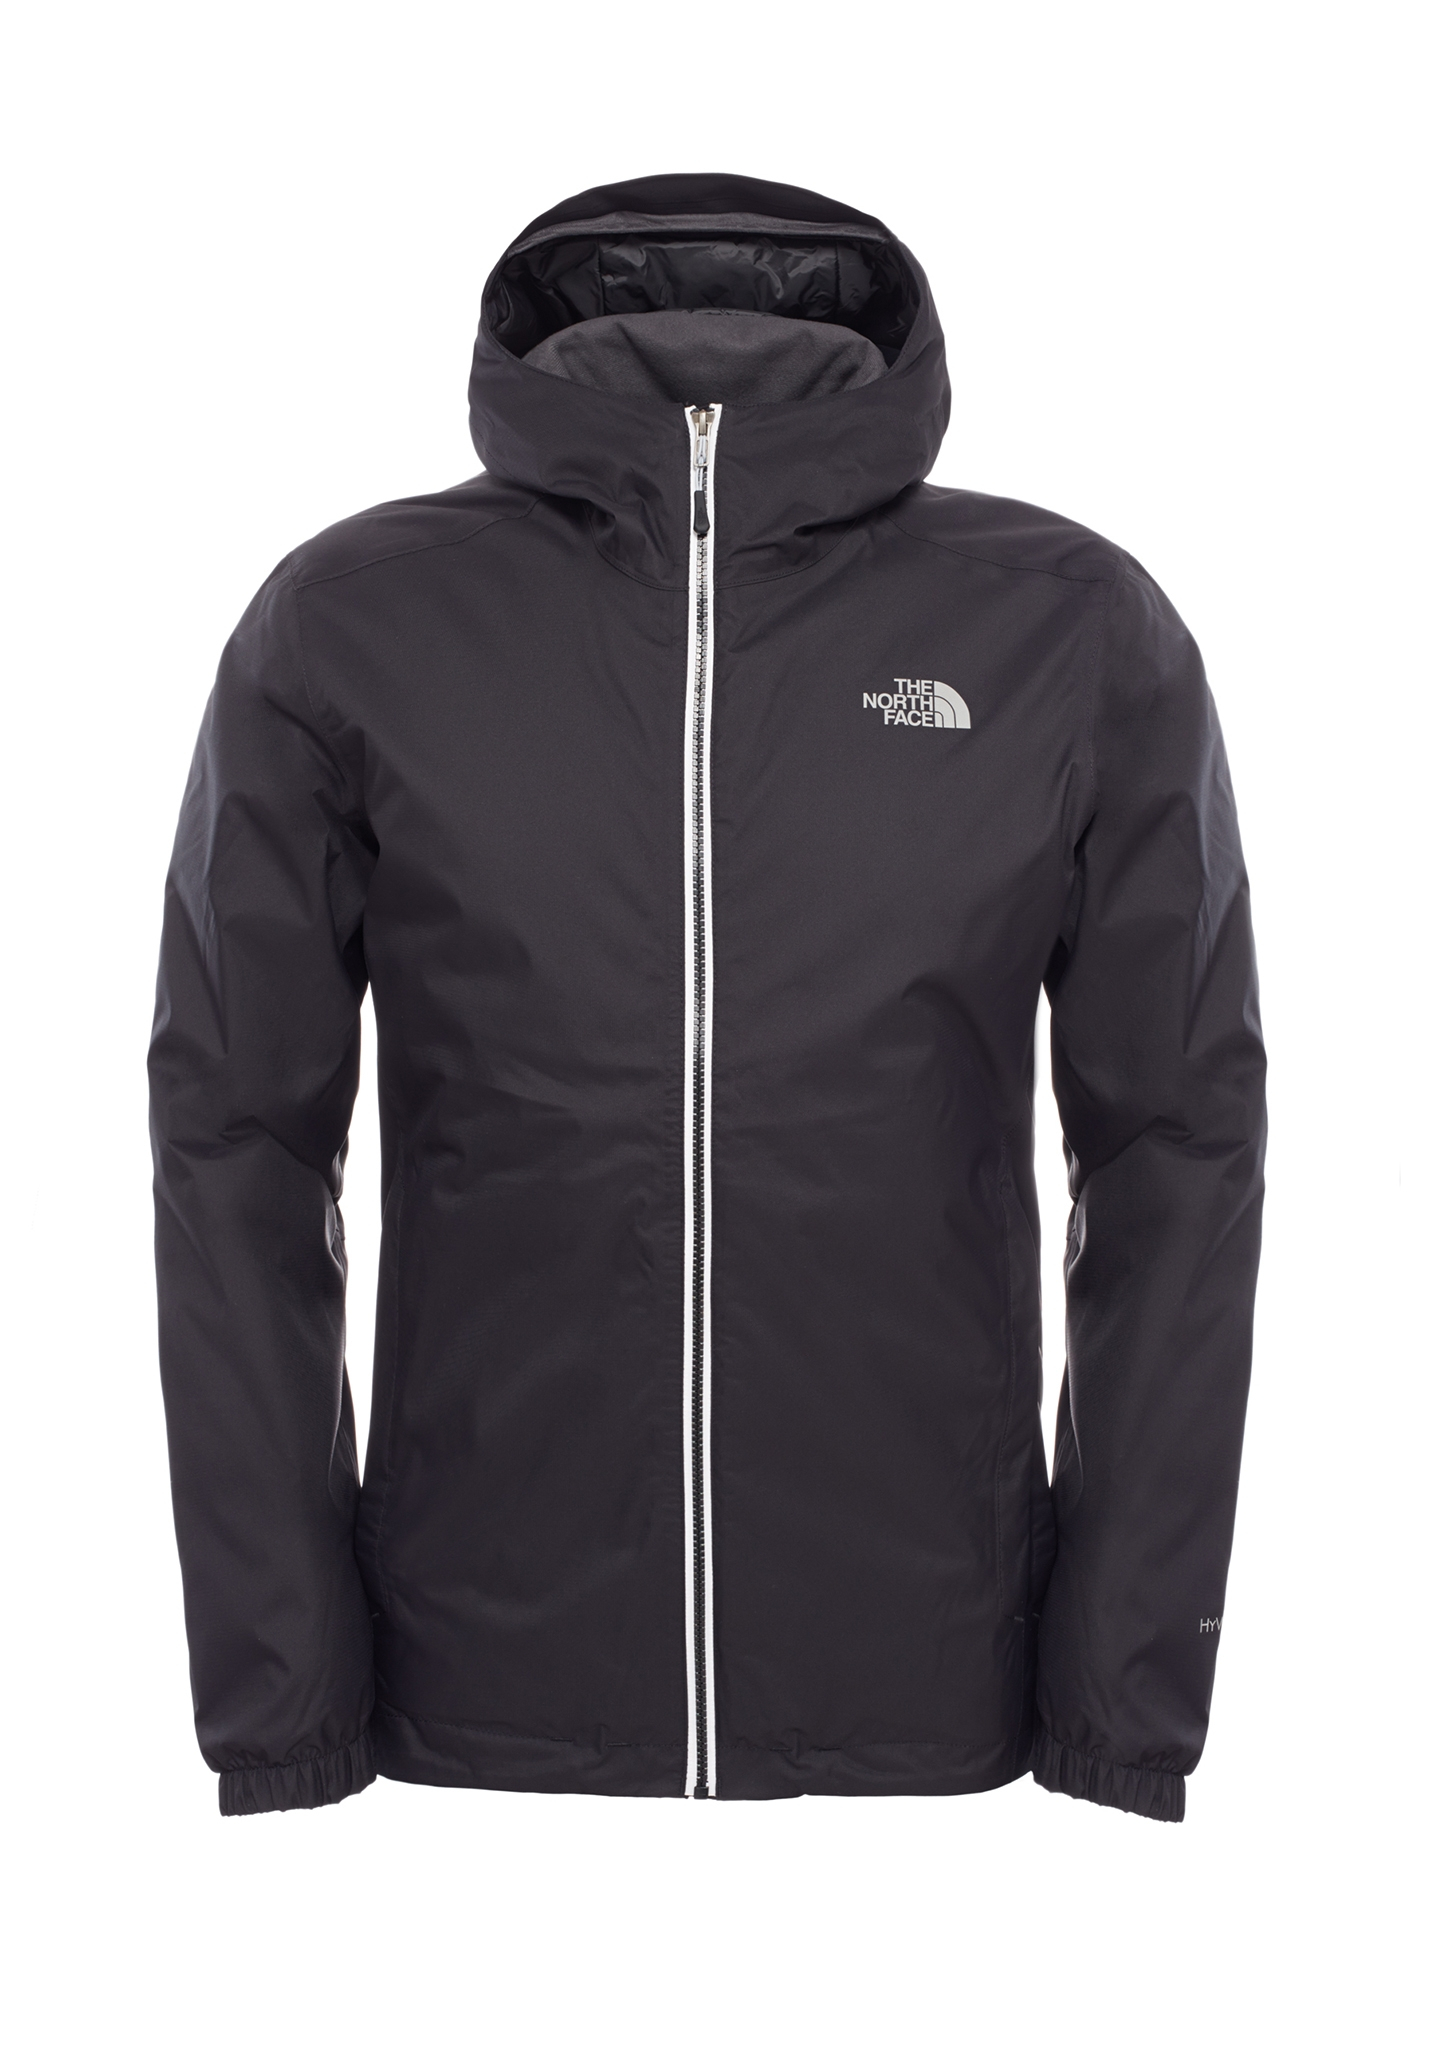 The North Face Quest Insulated Jacke tnf schwarz XXL